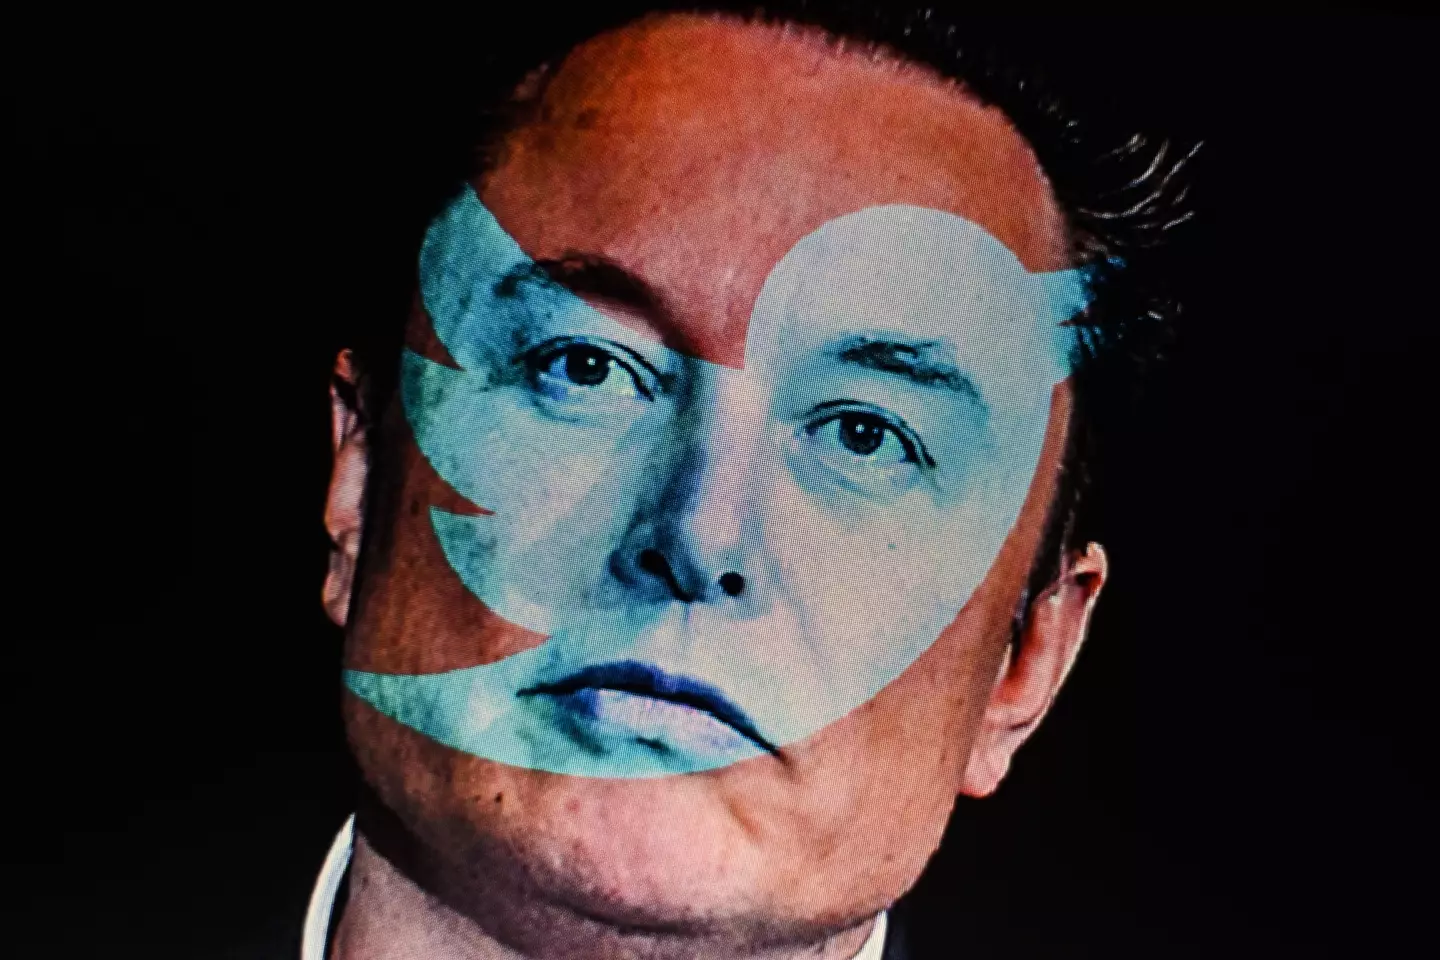 Musk's takeover of Twitter has been controversial.